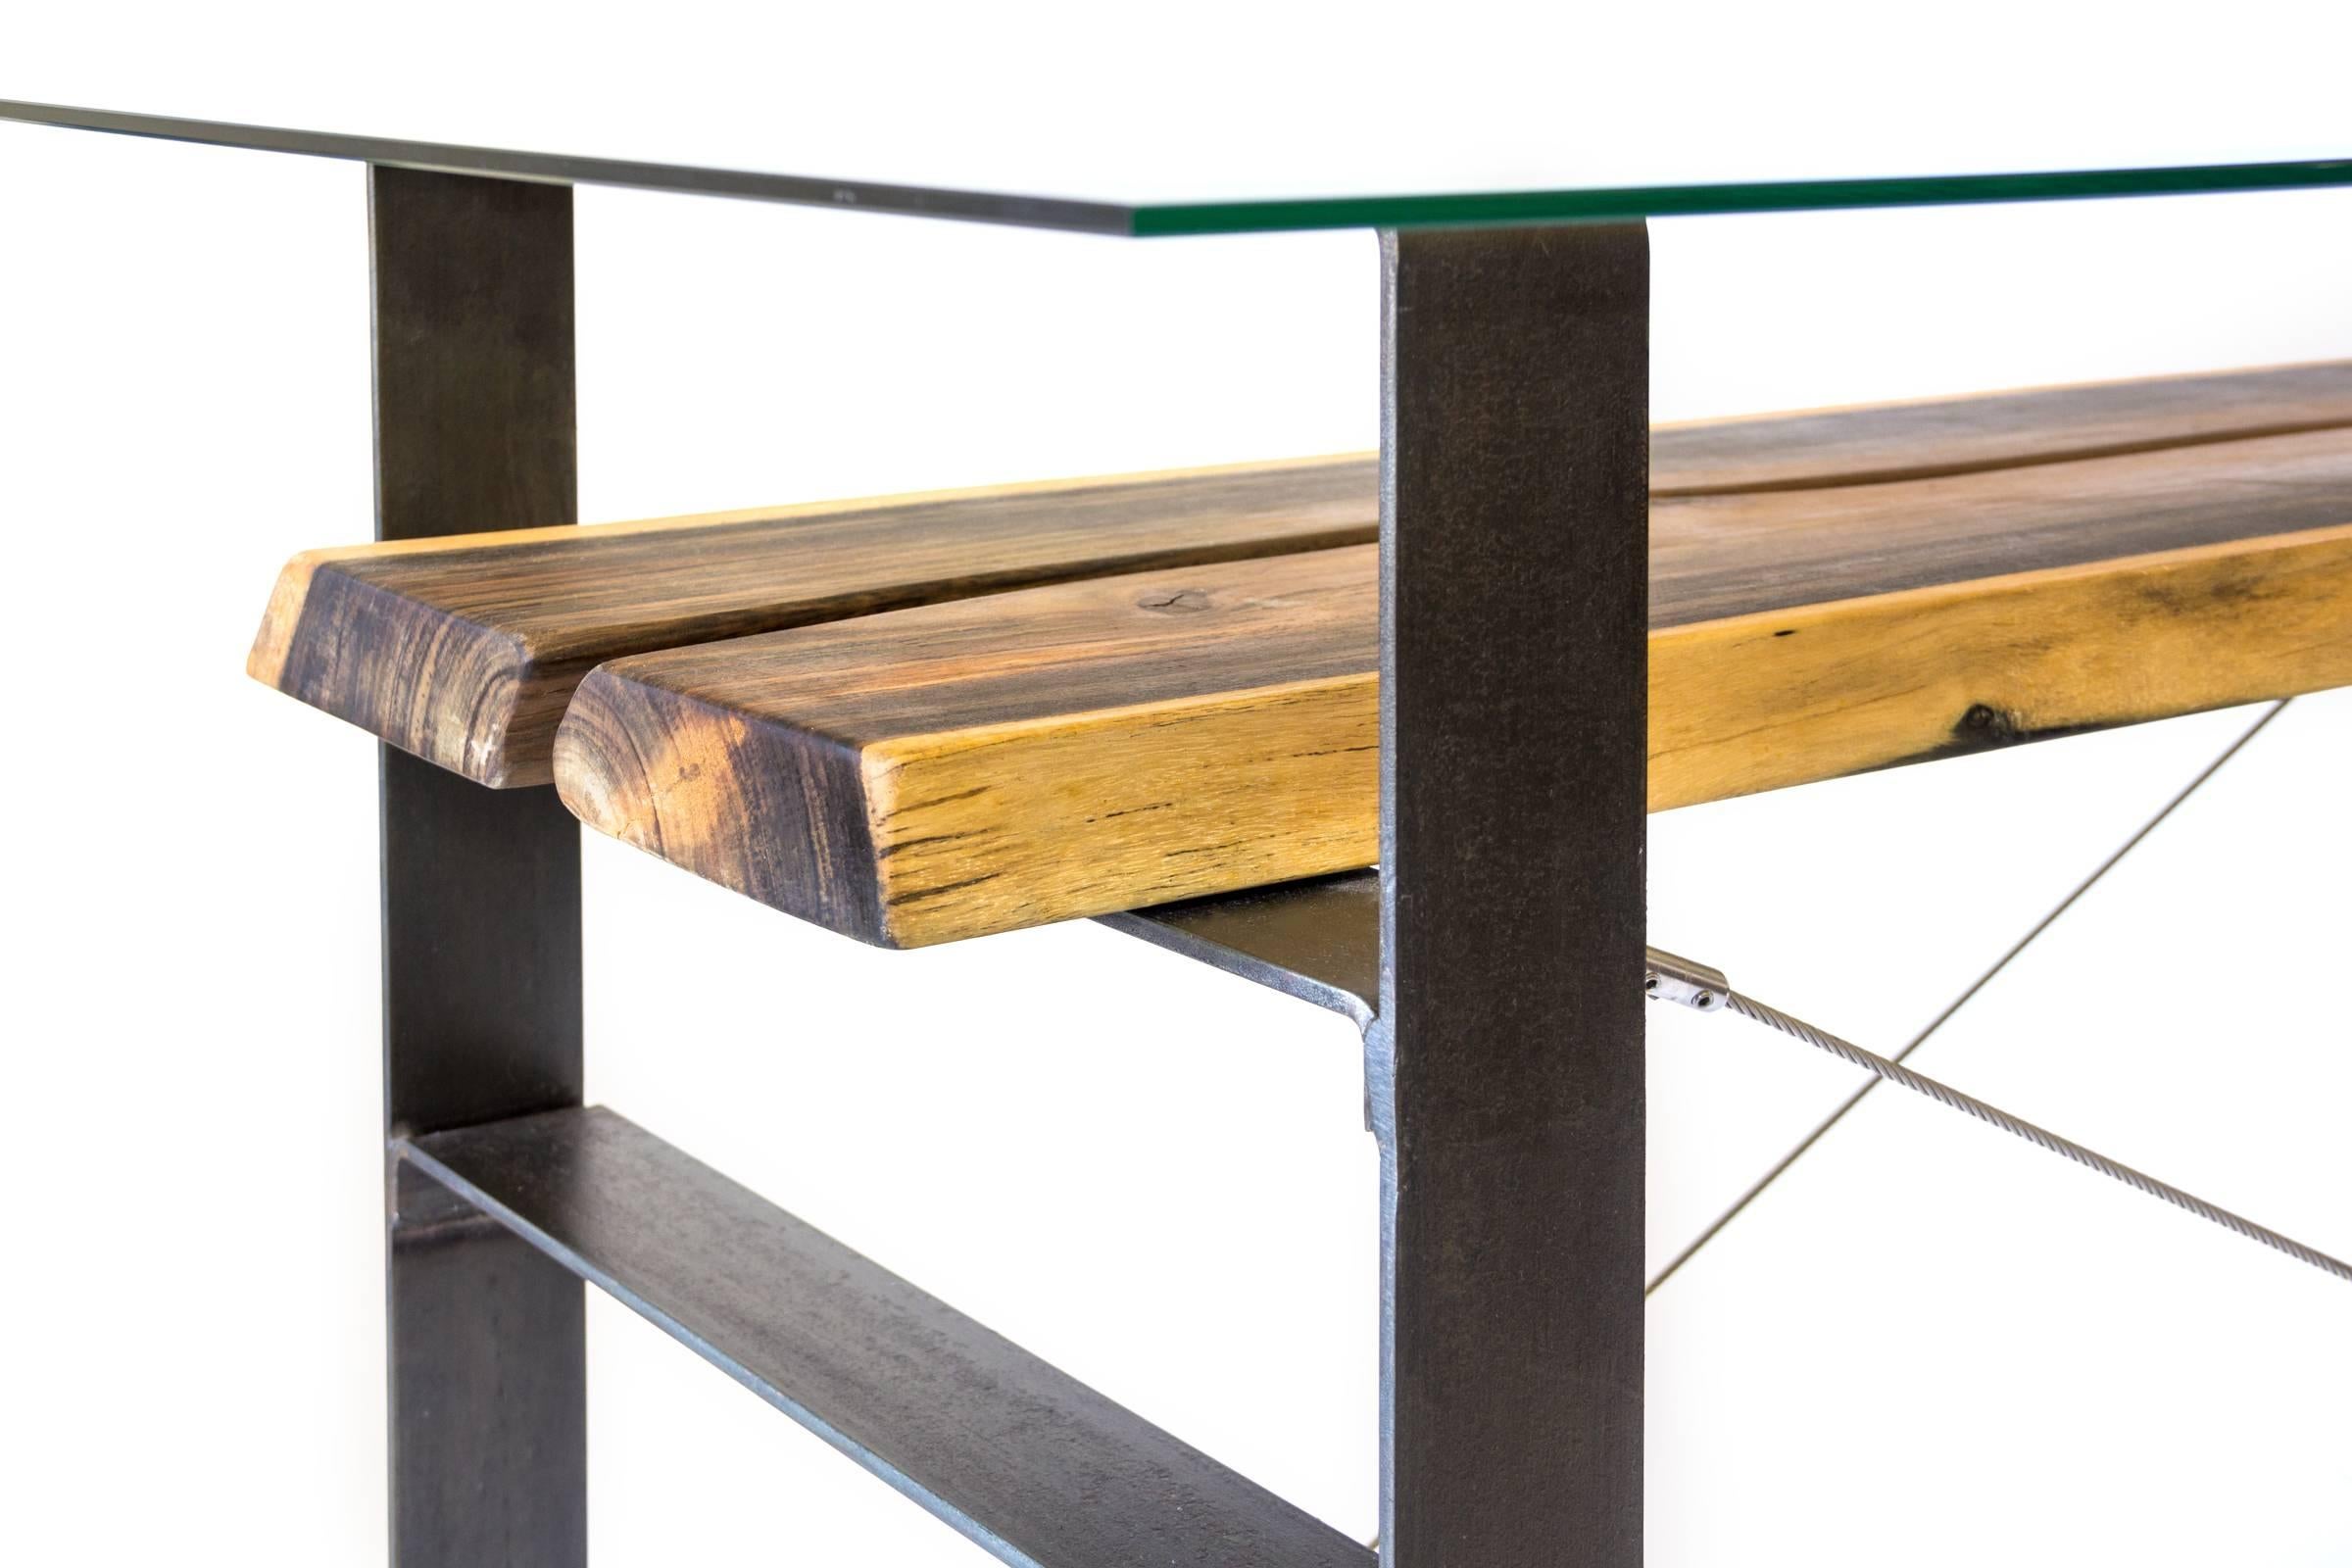 A dining table for up to eight people or just a simple console for your home.

The contrasting base that connects this exotic mahoe wood is made using a stunning black steel and stainless steel cables. Giving an industrial finish to the design,